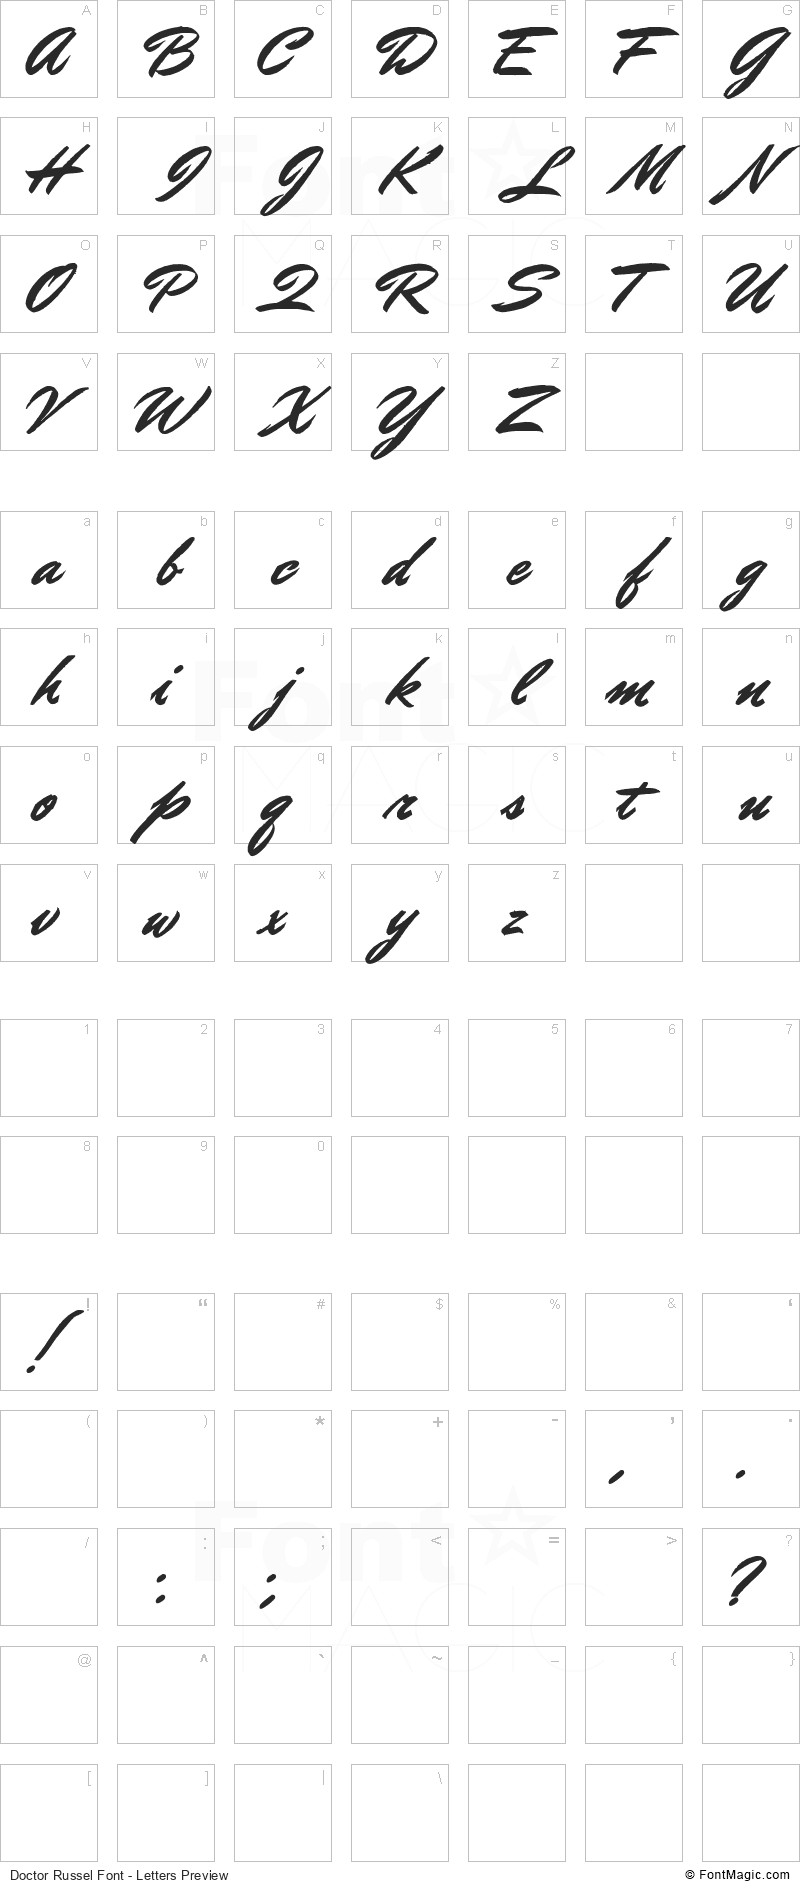 Doctor Russel Font - All Latters Preview Chart